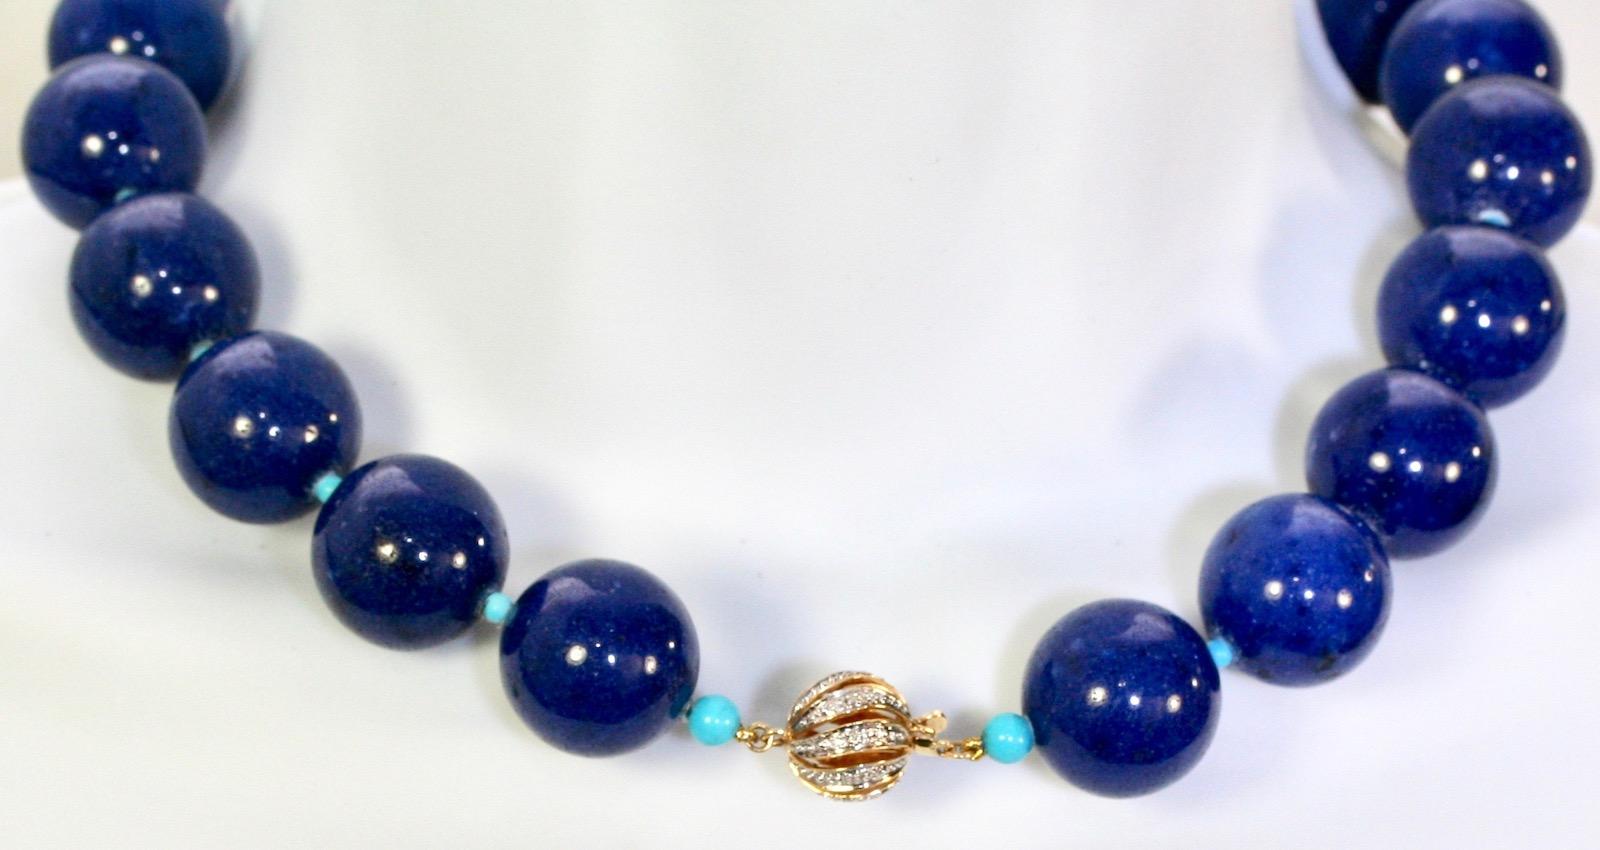 Is there a more intense and beautiful color than that of Lapis Lazuli?  These large 20mm lapis lazuli beads are enhanced by 2.5mm Sleeping Beauty turquoise beads as spacers between the large lapis.  The contrast of the baby blue turquoise beads and